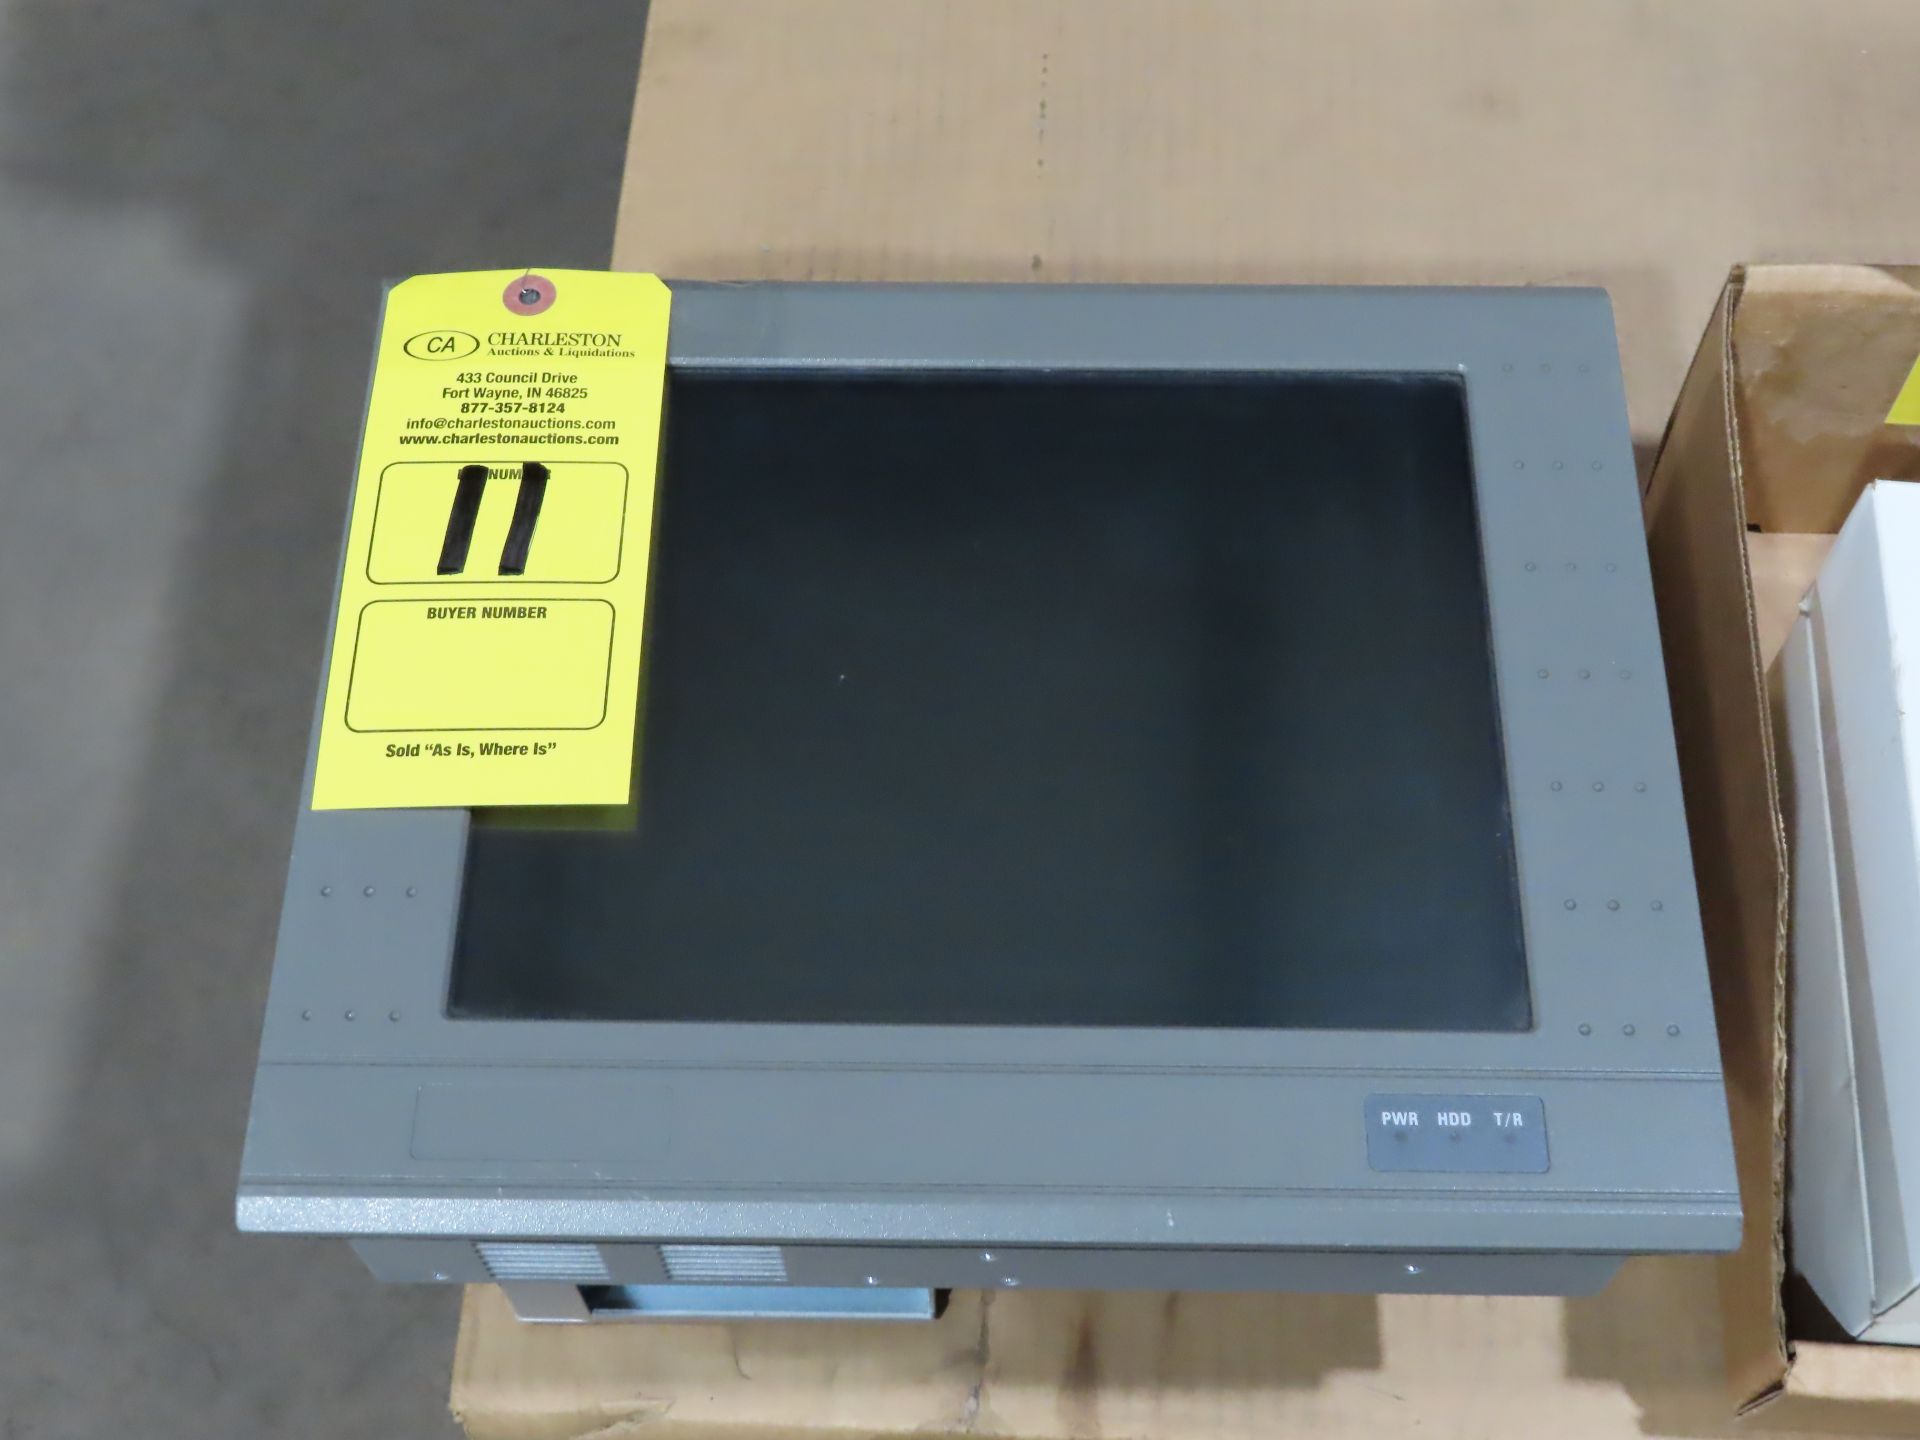 Axiomtek user interface model P1126-675-RC-No, as always, with Brolyn LLC auctions, all lots can